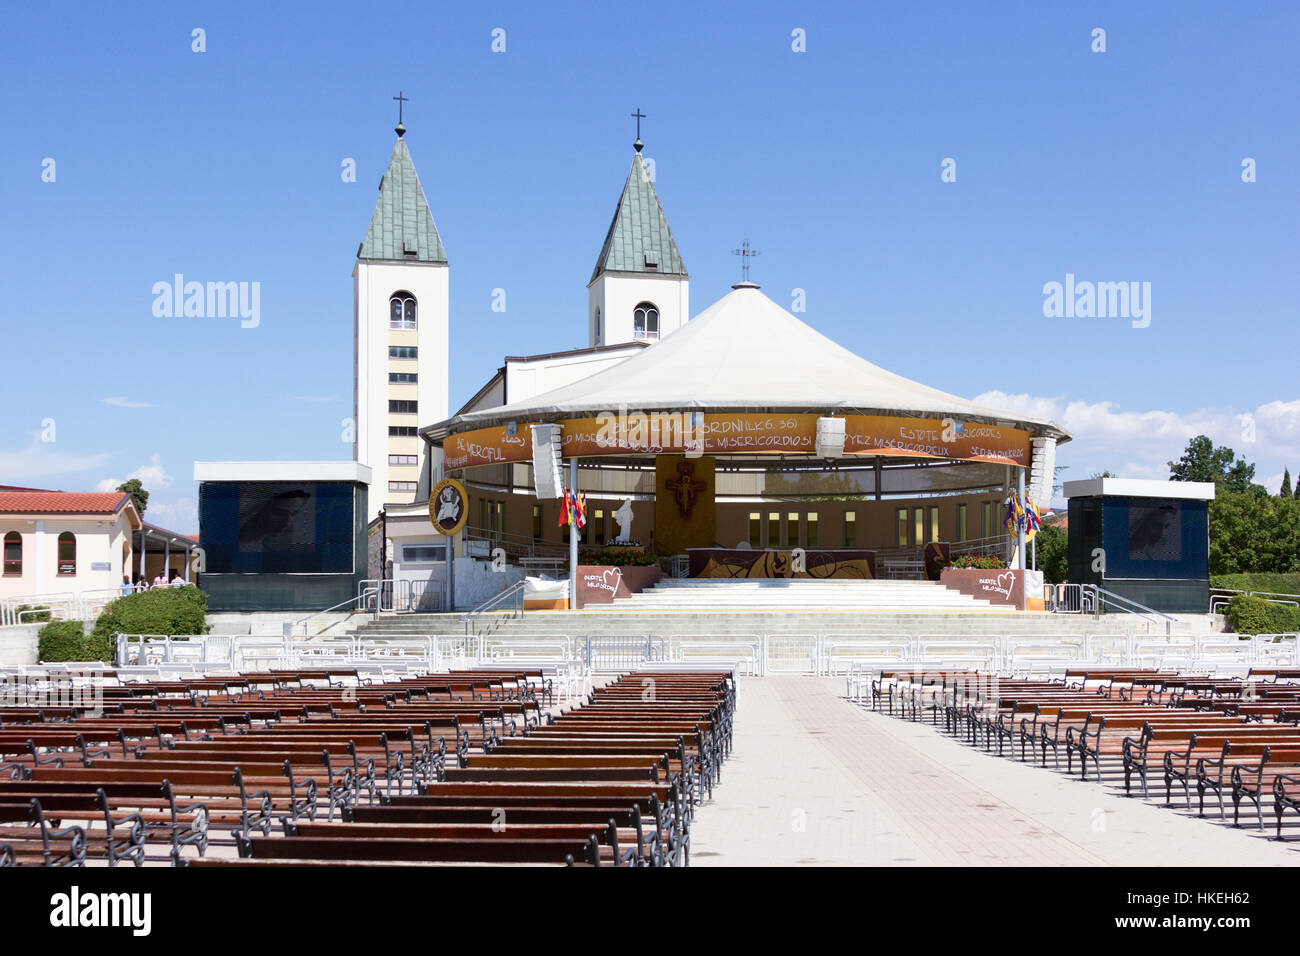 MEDJUGORJE, BOSNIA AND HERZEGOVINA, August 20 2016. The square behind the Saint James church on a sunny day. Stock Photo